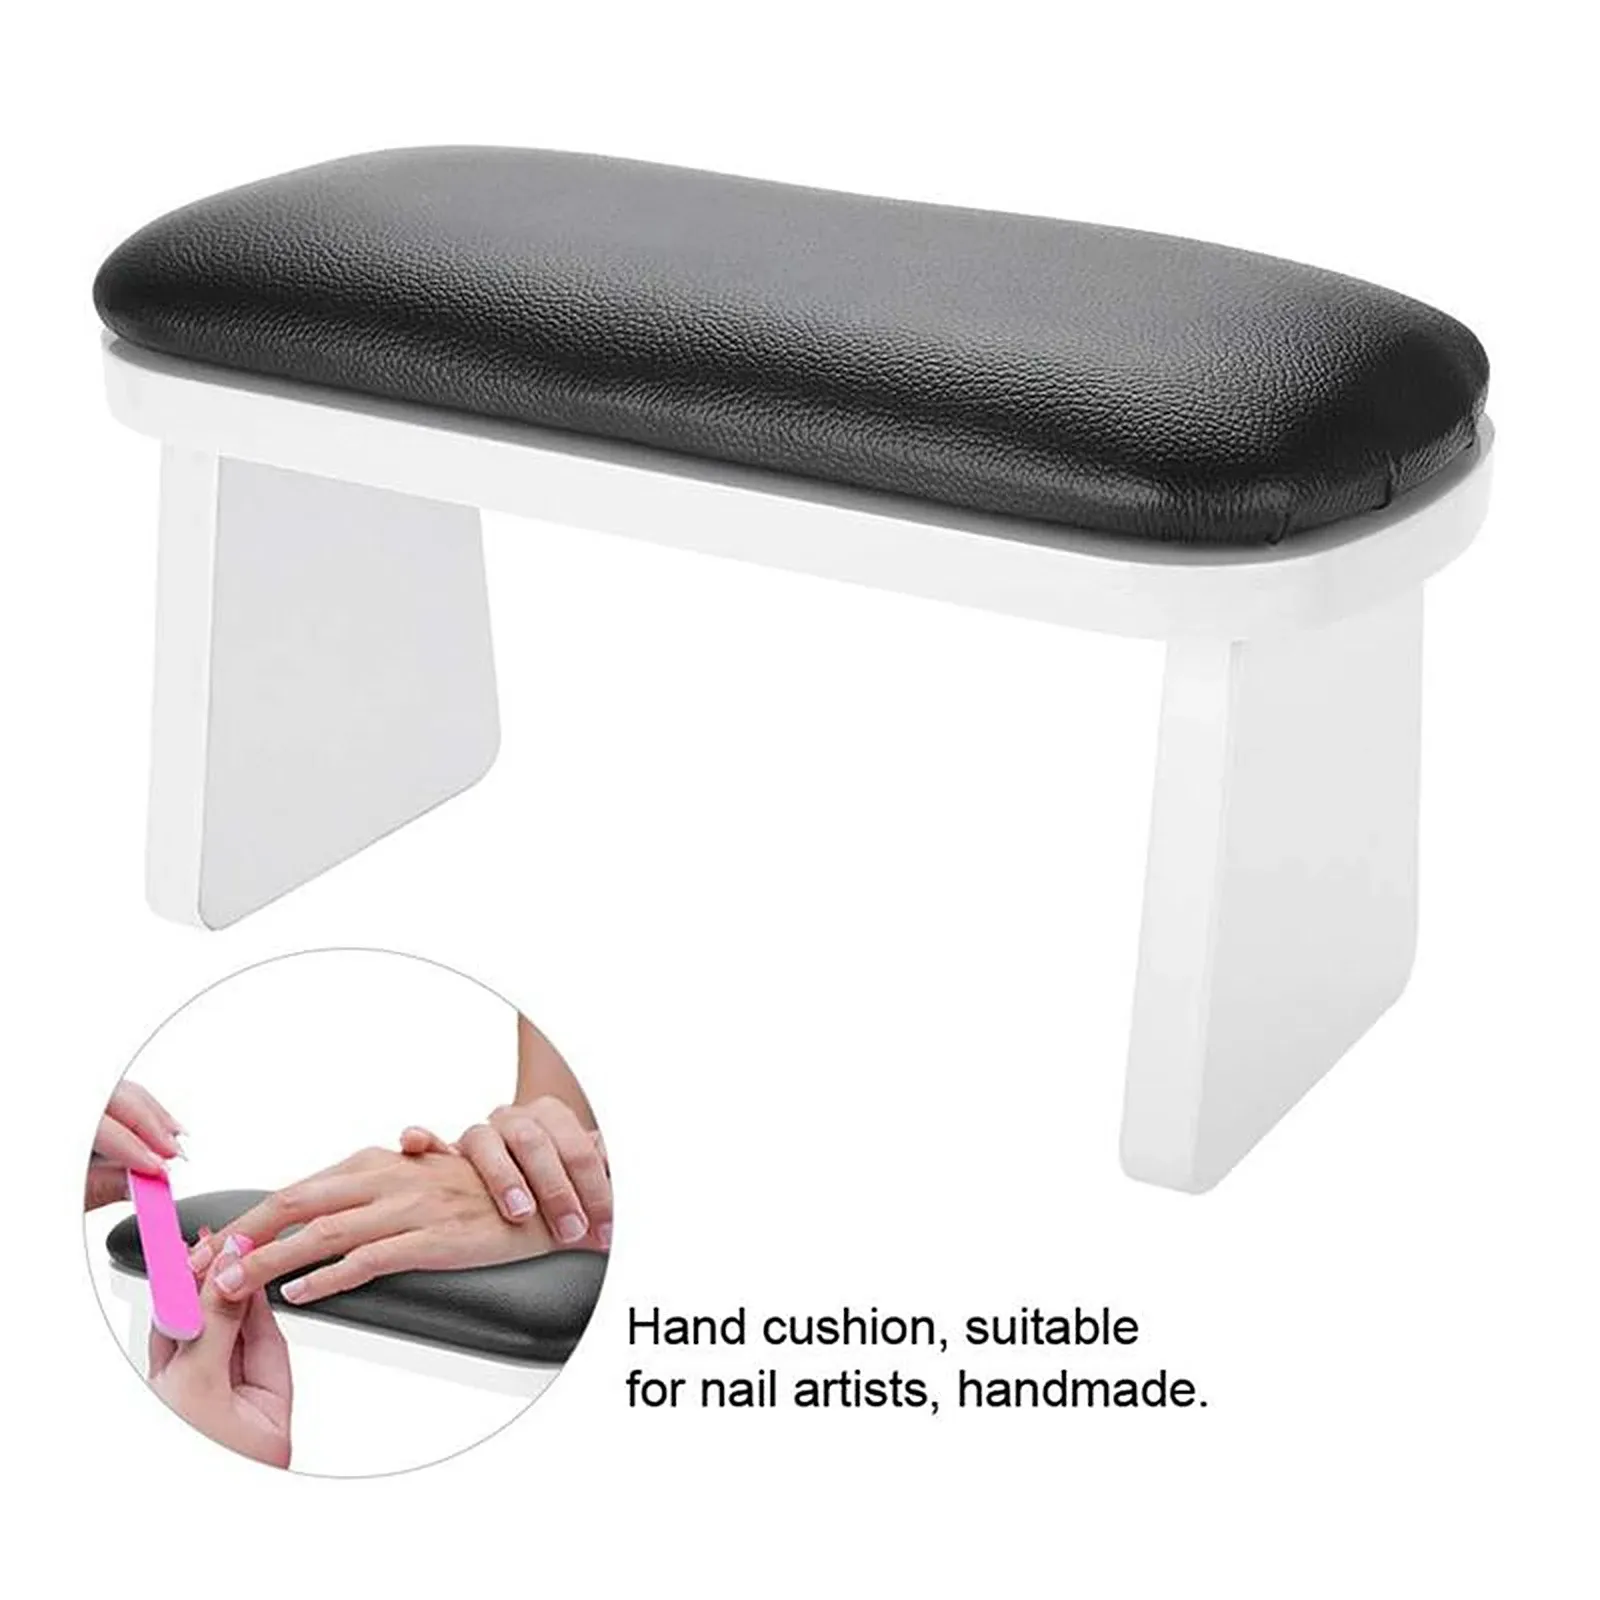 Equipment Nail Arm Rest Cushion, PU Leather Manicure Arm Rest Pillow Table for Technician Use, Save Space with 2 Colors to Select